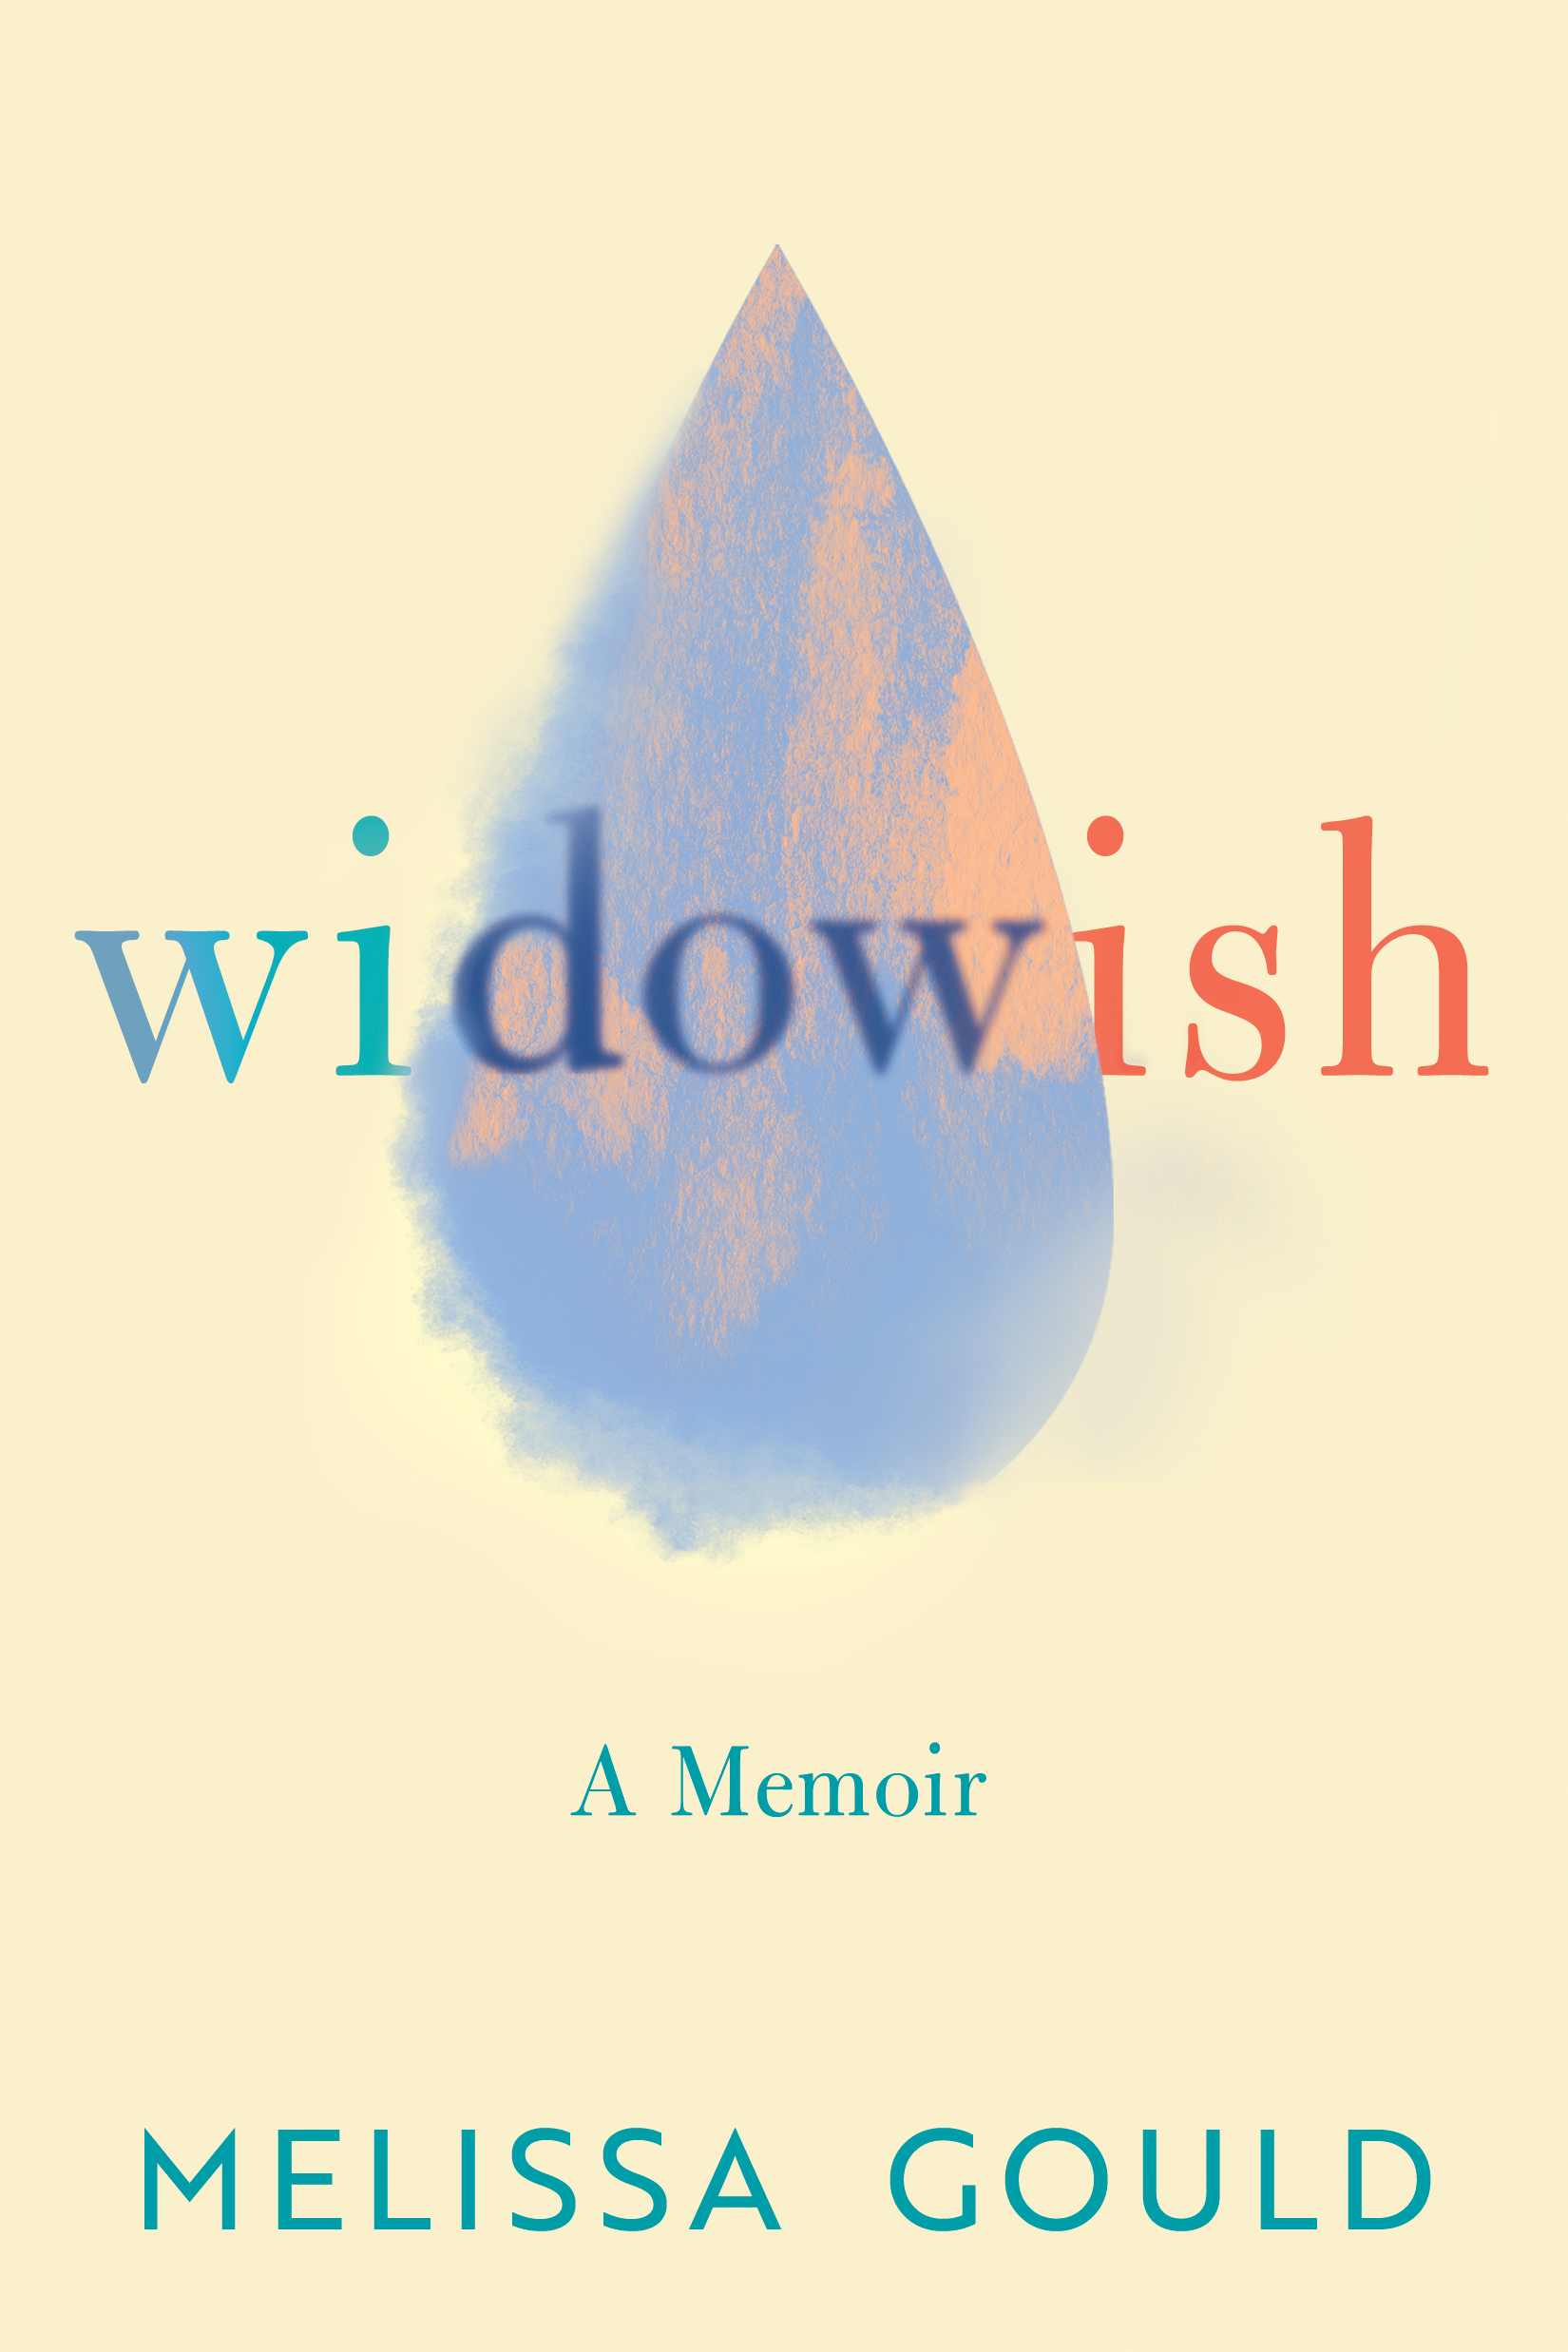 Virtual Book Launch: Widowish by Melissa Gould in conversation with Robin Finn